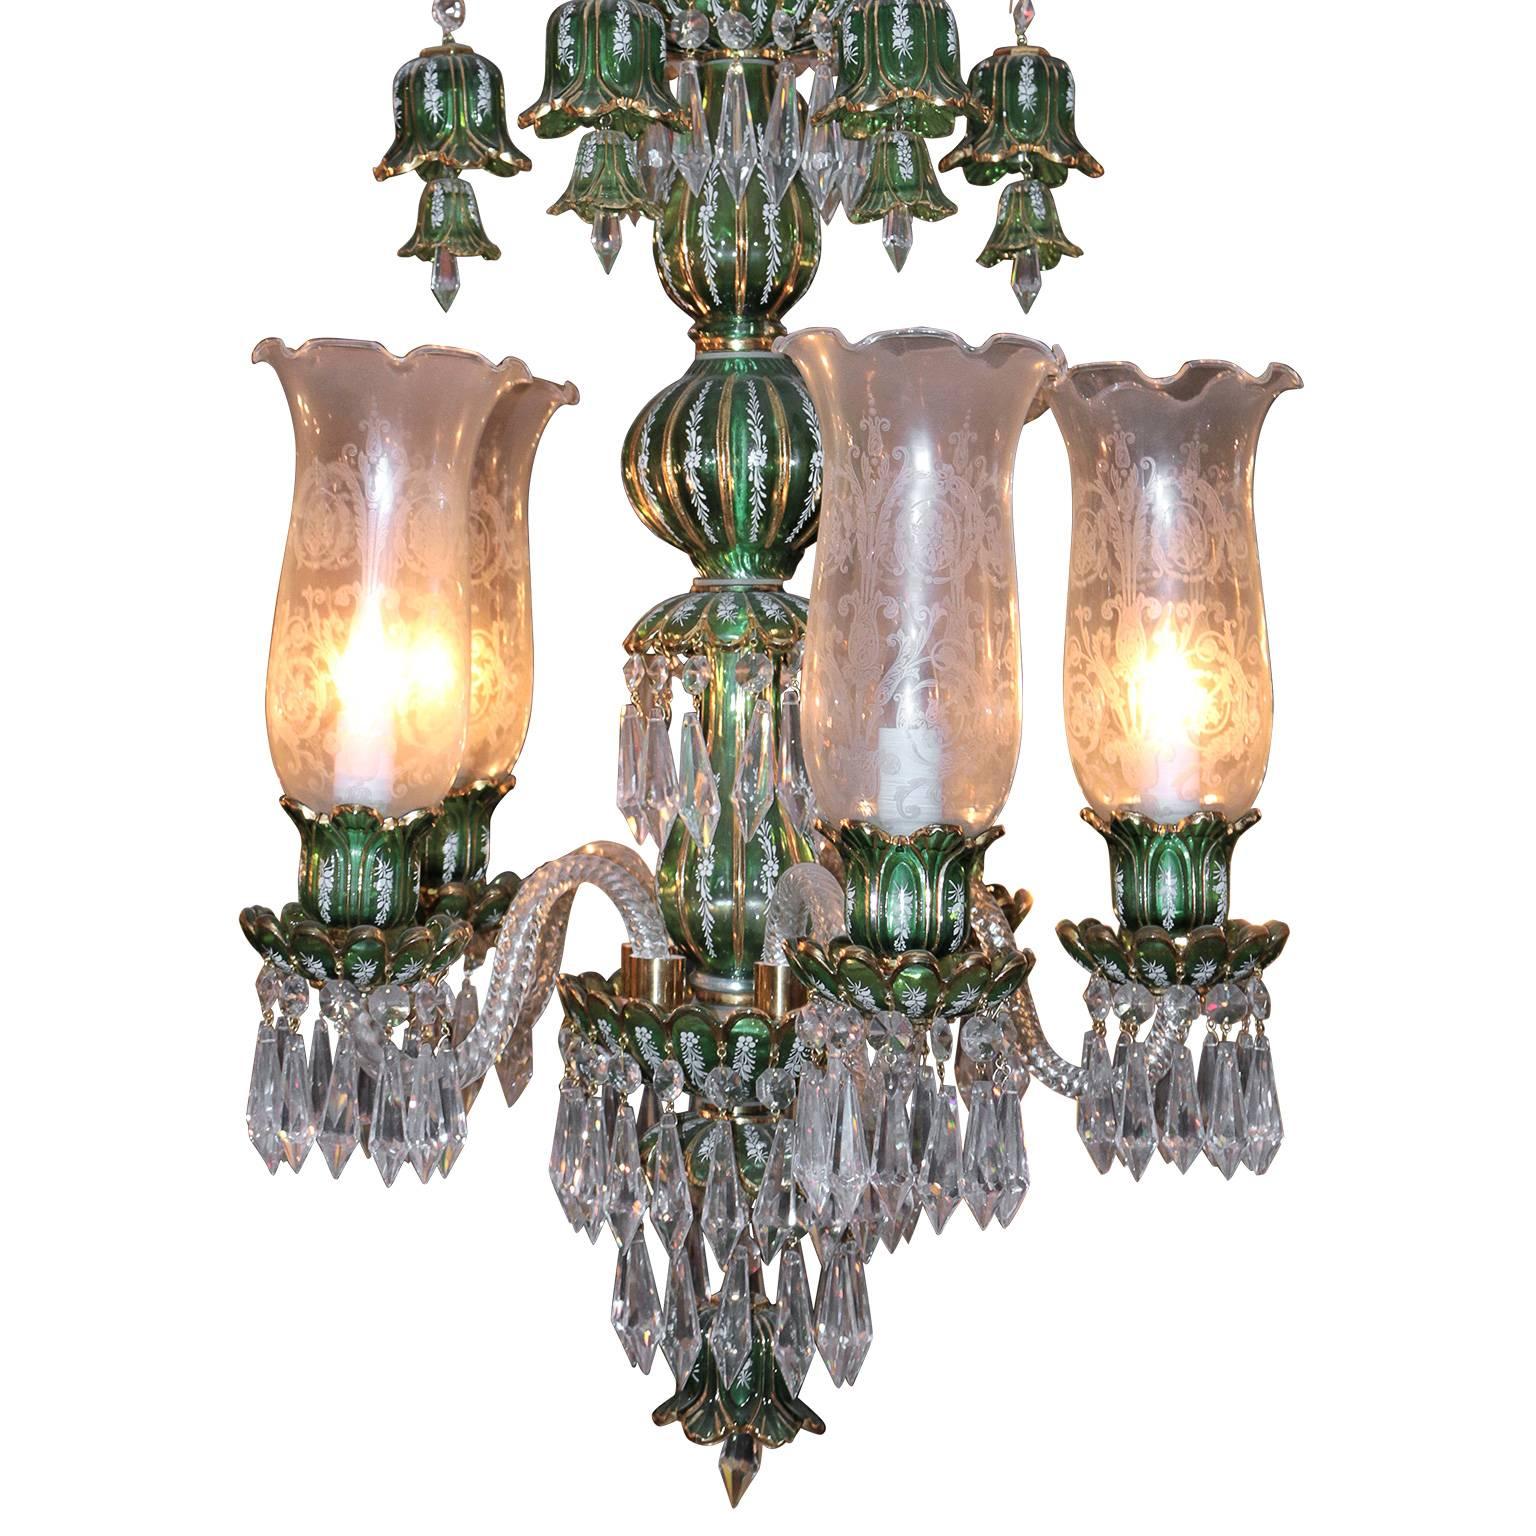 This classy Bohemian etched glass crystal. 

Emerald green two-tier chandelier has Bohemian etched glass crystals beautifully placed beneath each bottom tier tulip and blown glass covers. The top tier arms are made of Bohemian crystals allowing